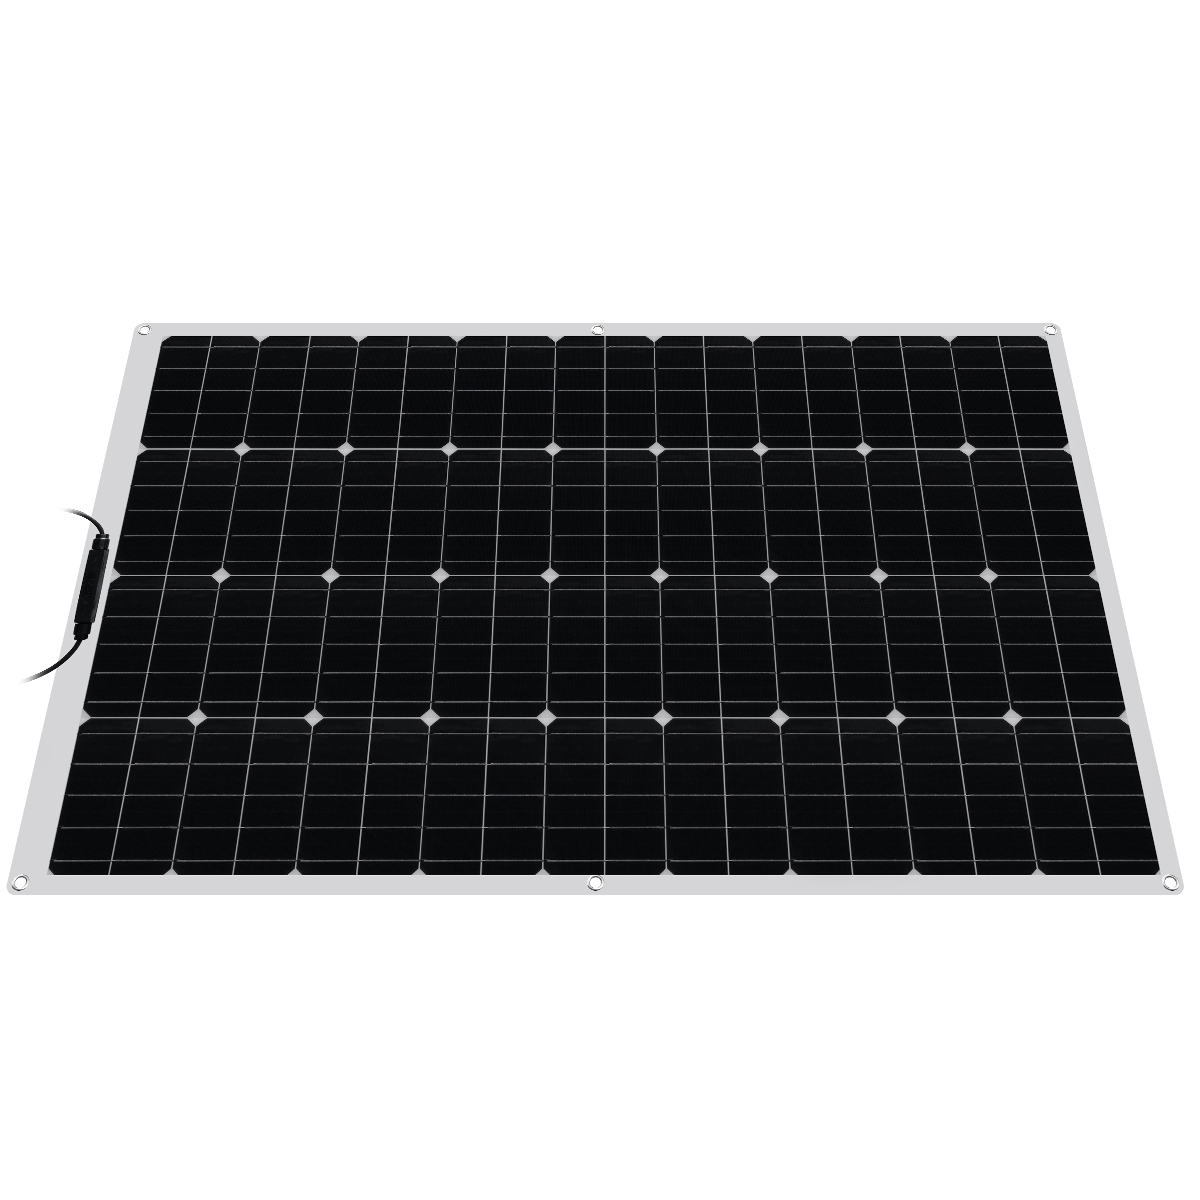 100W-18V-Flexible-Solar-Panel-Battery-Power-Charge-Kit-For-RV-Car-Boat-Camping-1717562-7